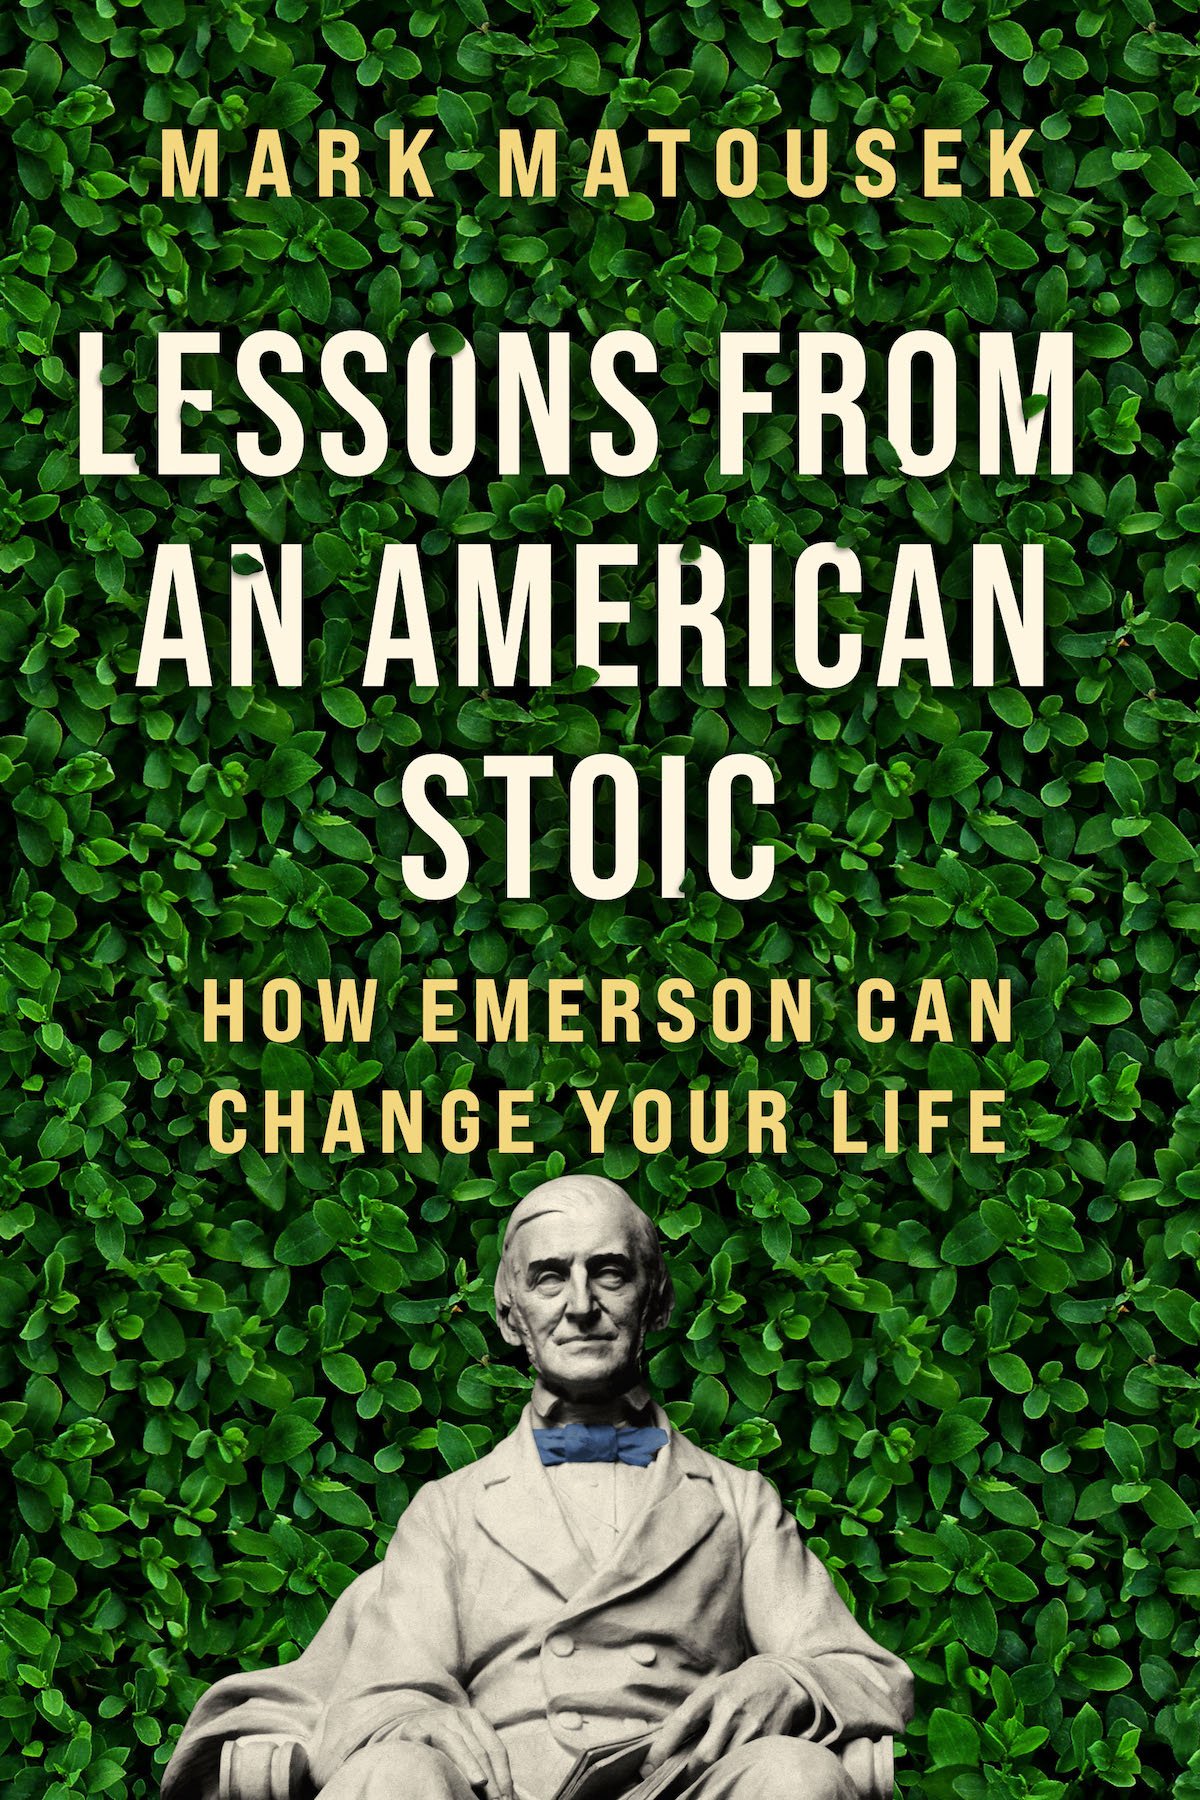 Matousek, Mark LESSONS FROM AN AMERICAN STOIC copy.jpeg